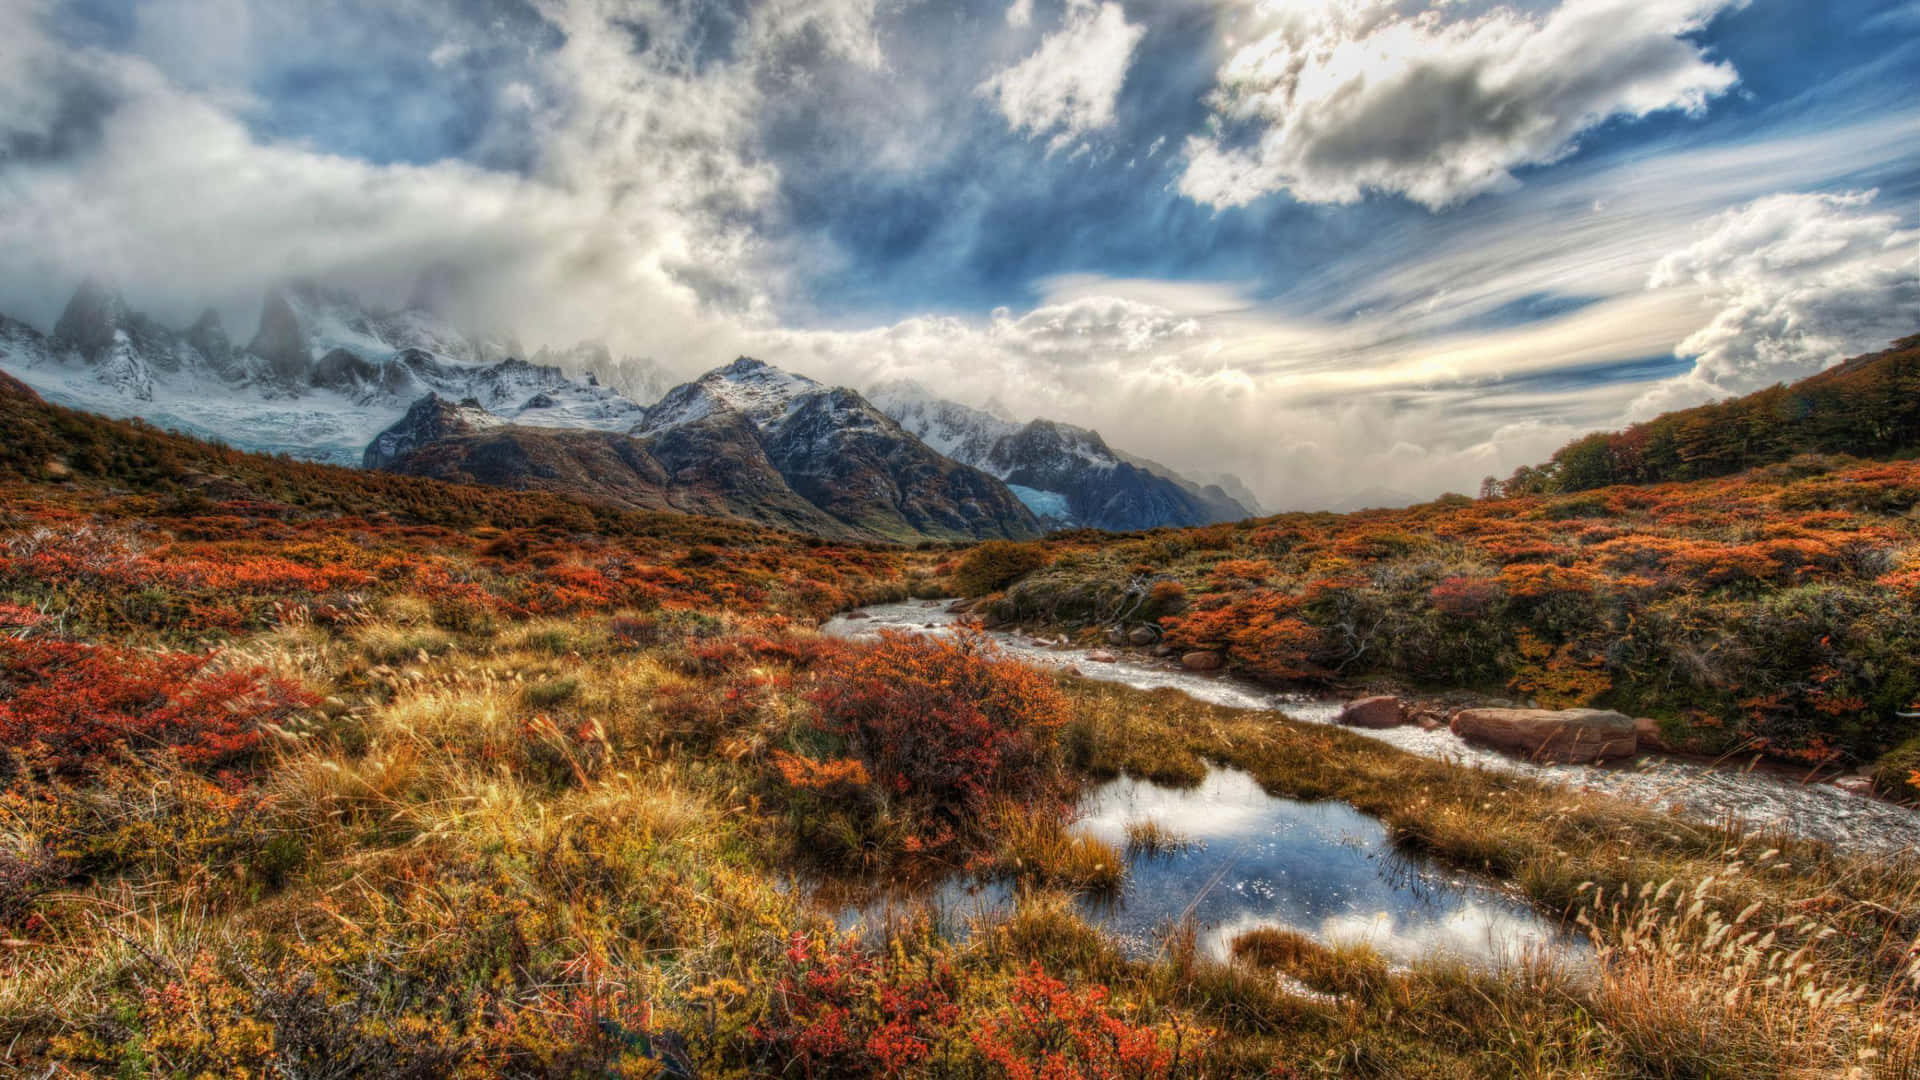 Explore Patagonia's stunning landscapes